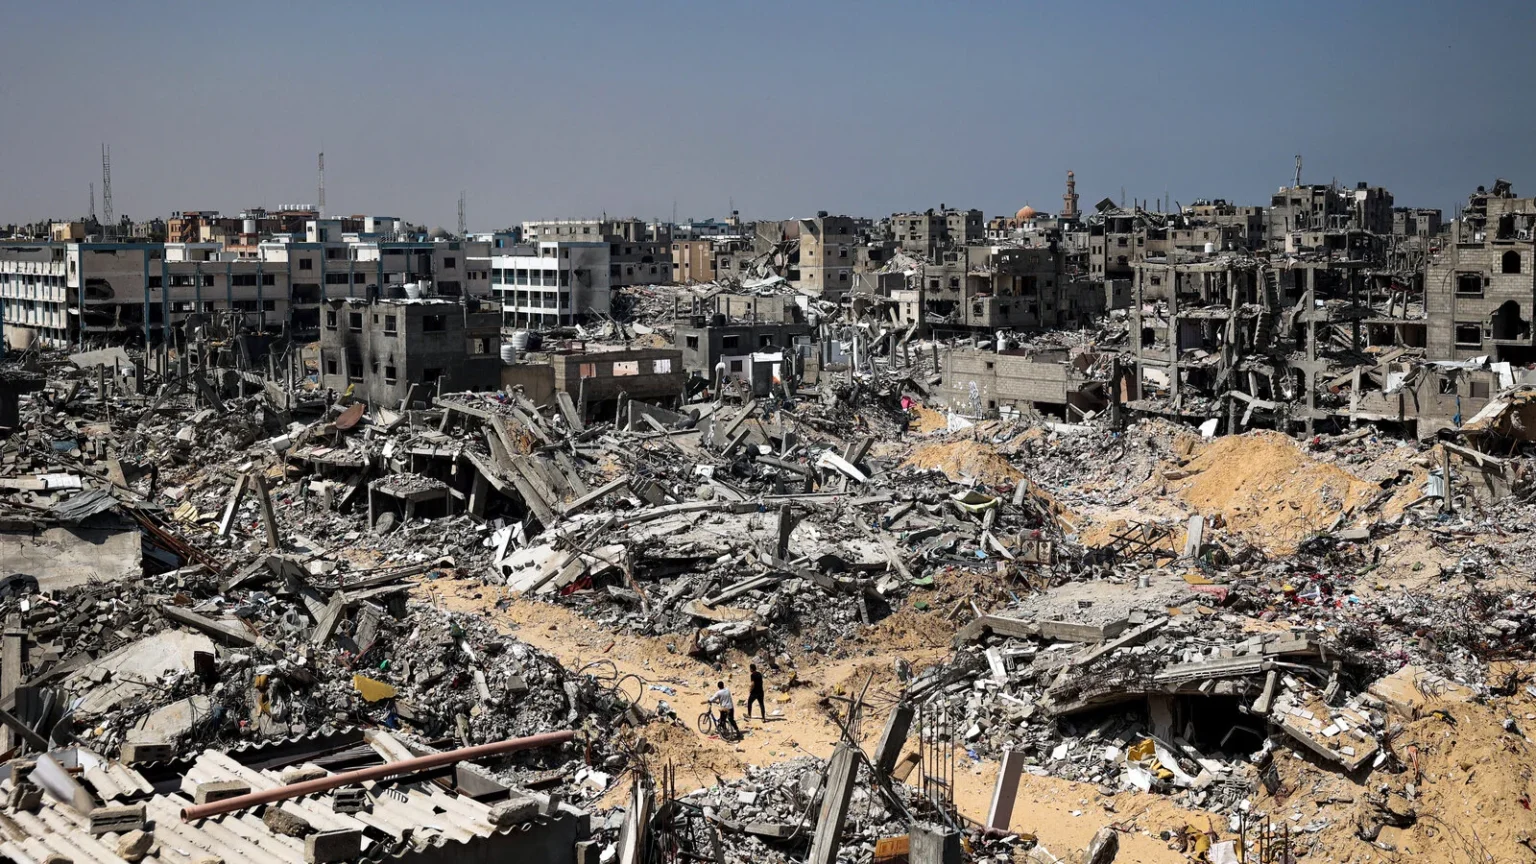 it-could-take-more-than-10-years-to-clear-debris-in-gaza-un